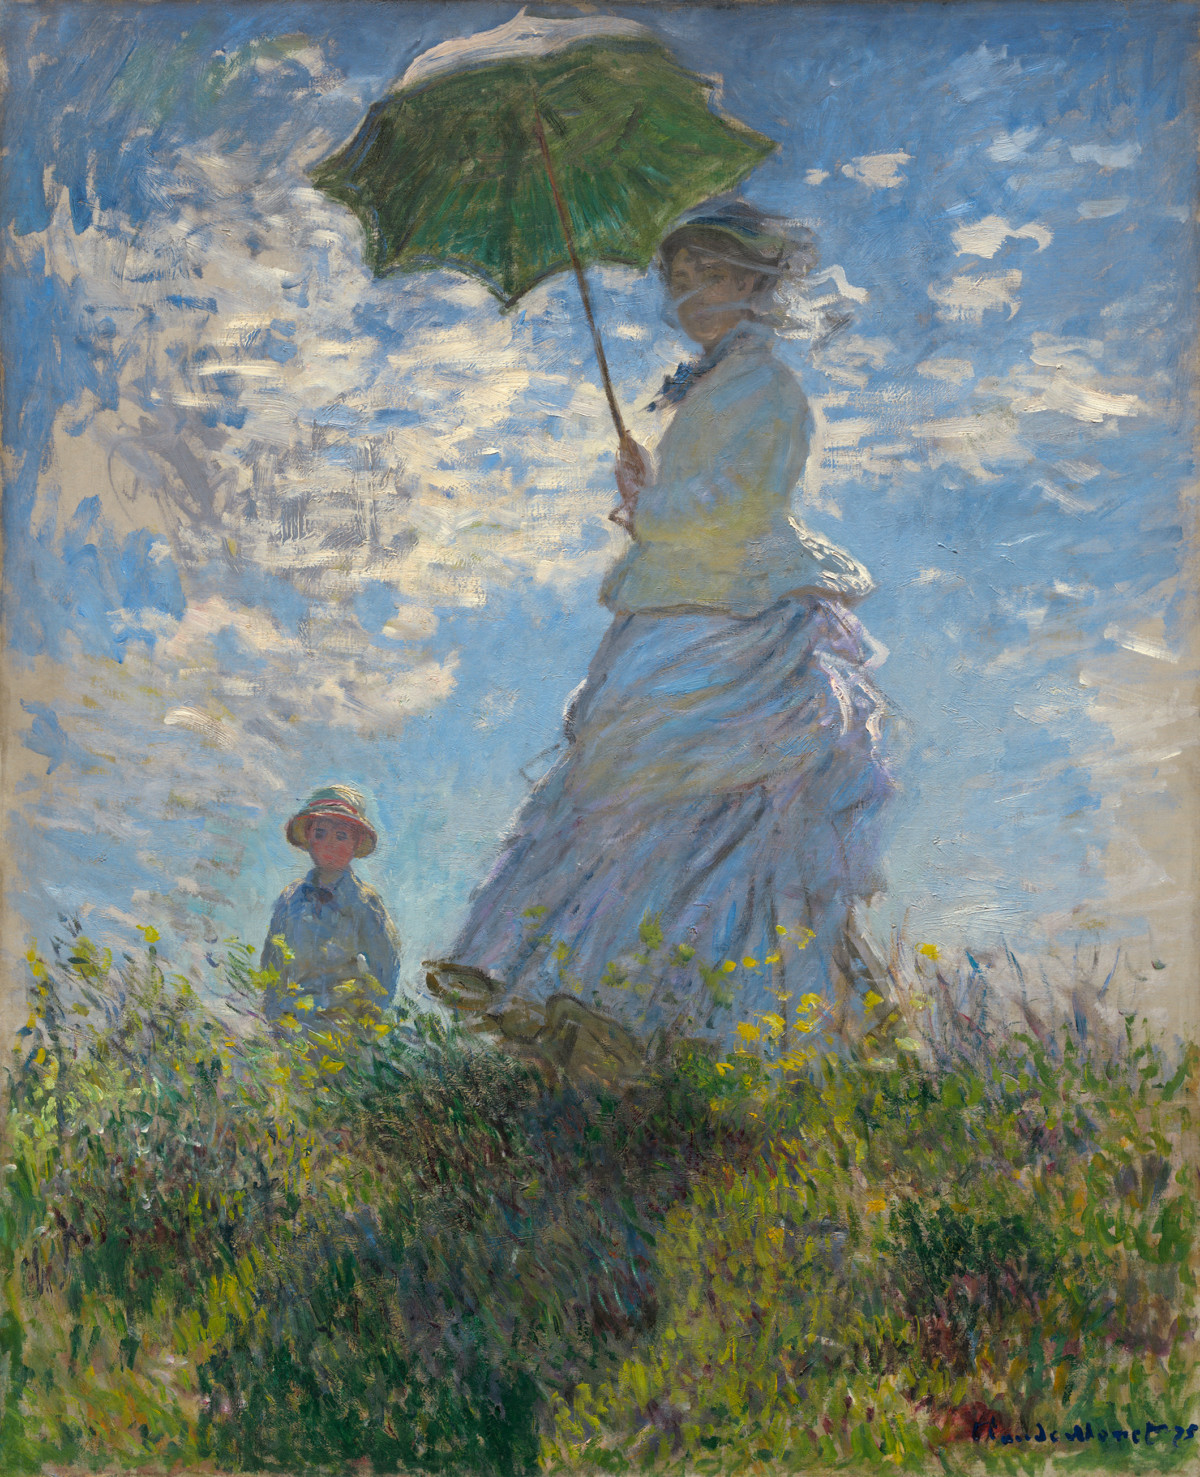 Camille and Jean on a hill, 1875